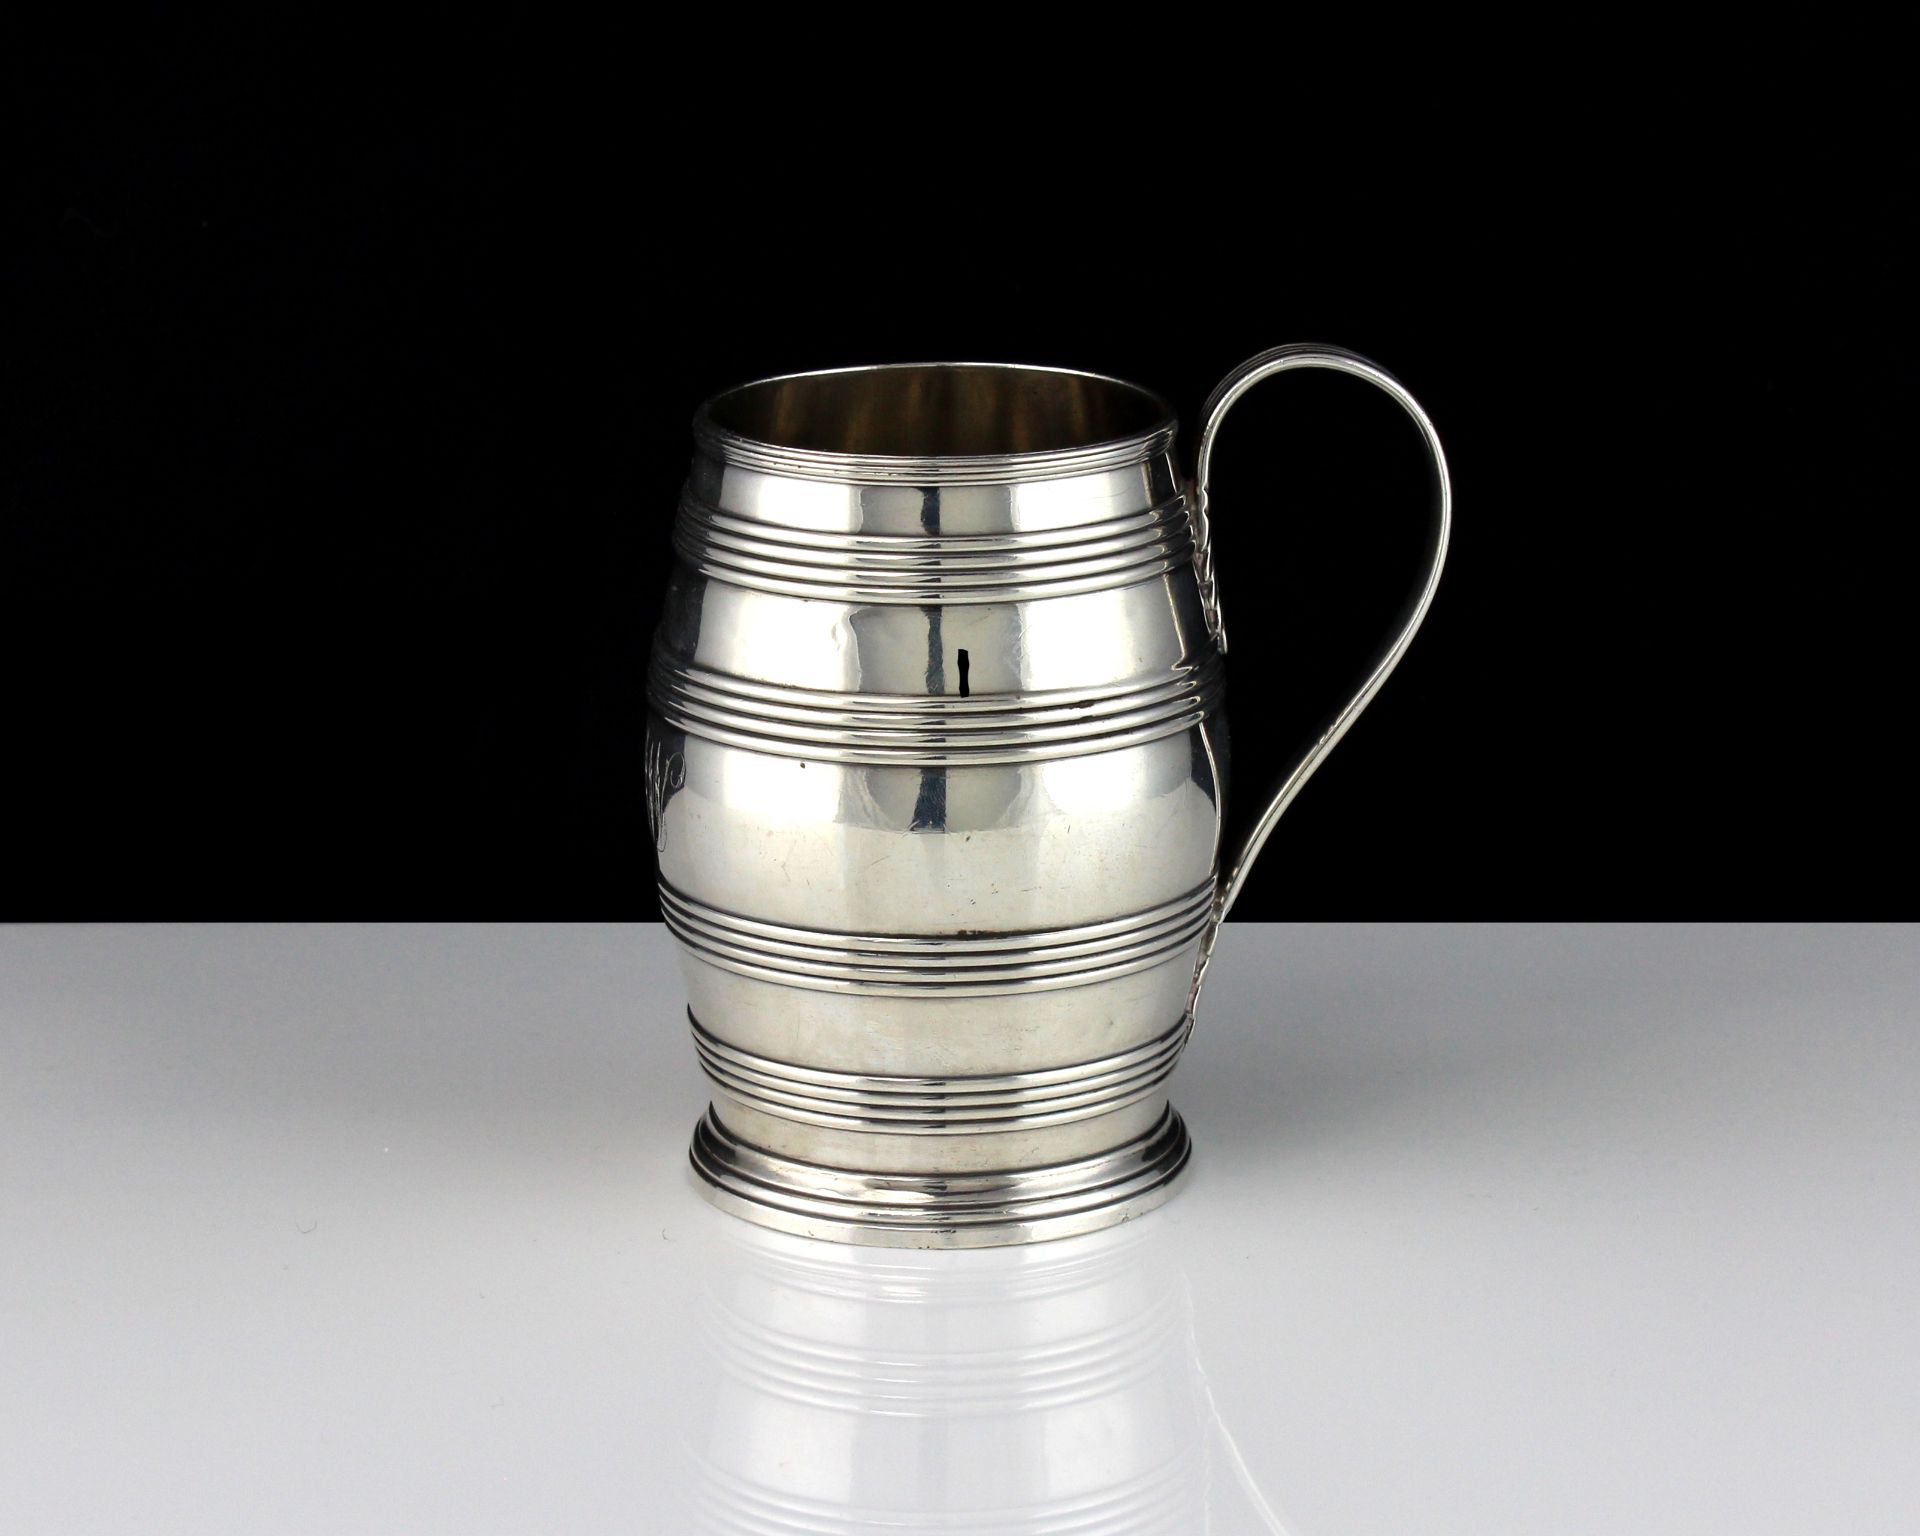 An antique George III Sterling Silver barrel mug by John Robins, London 1783 designed in the form of